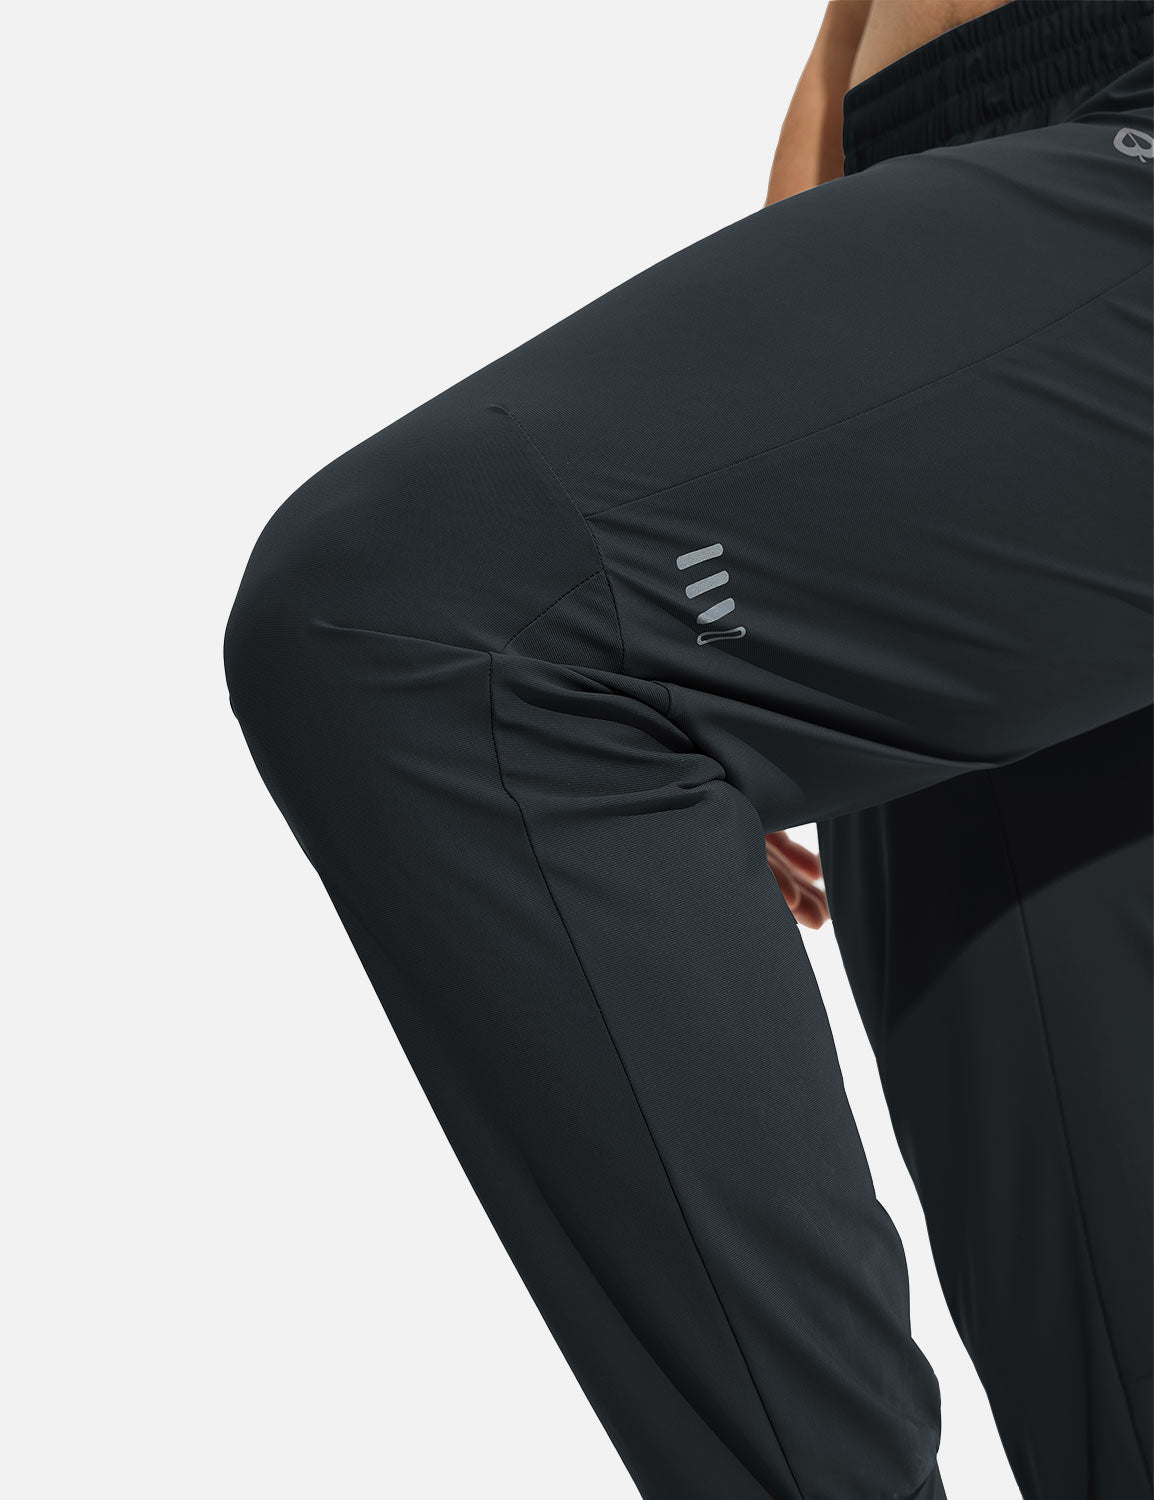 Baleaf Men's High-Stretchy Quick-Dry Joggers Pants Anthracite Details